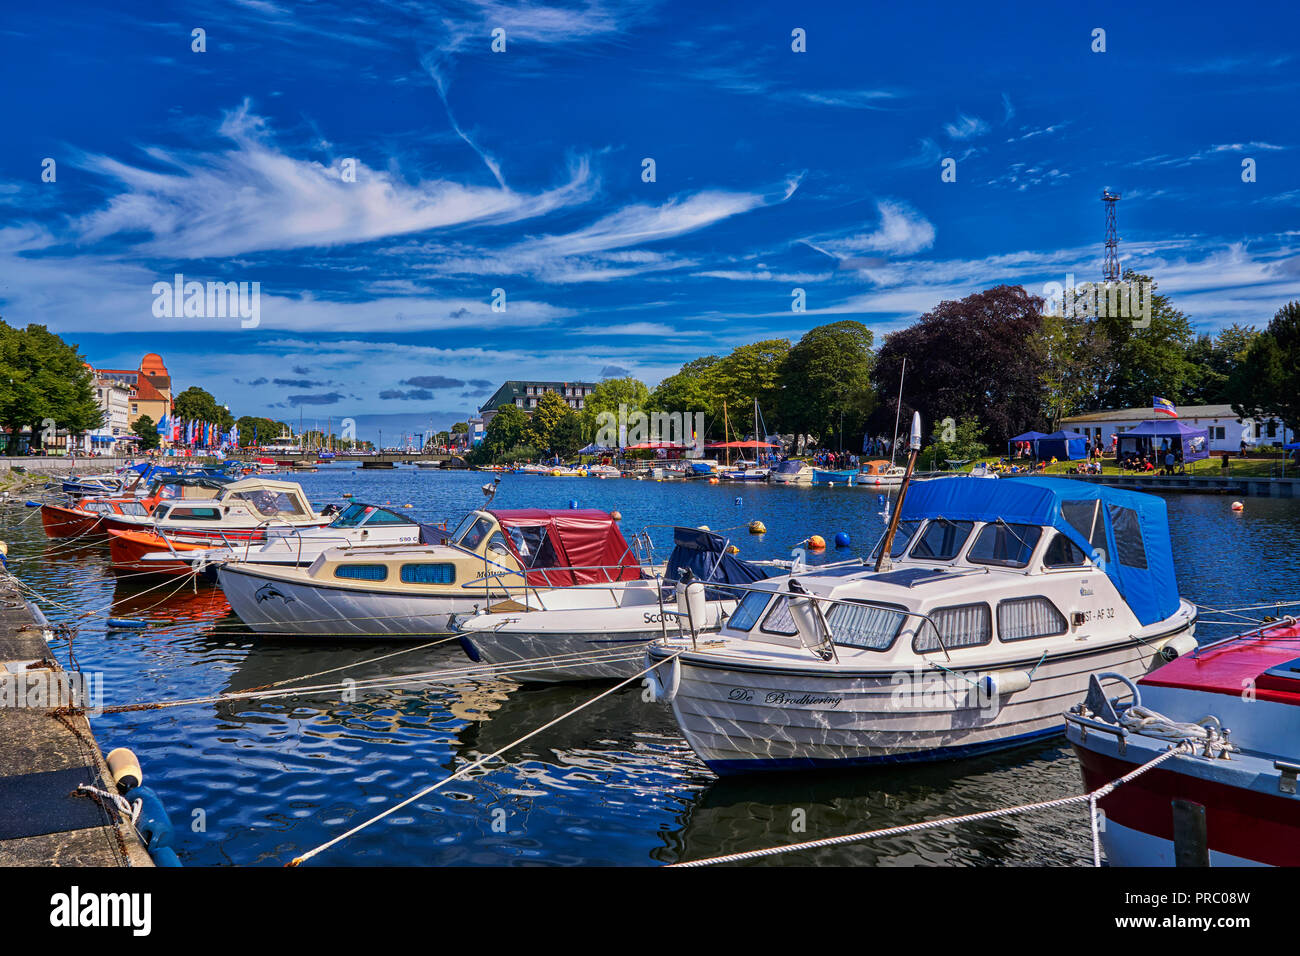 Powerboats moored in the harbor in Mecklenburg-Vorpommern on the Baltic Sea. Germany Stock Photo